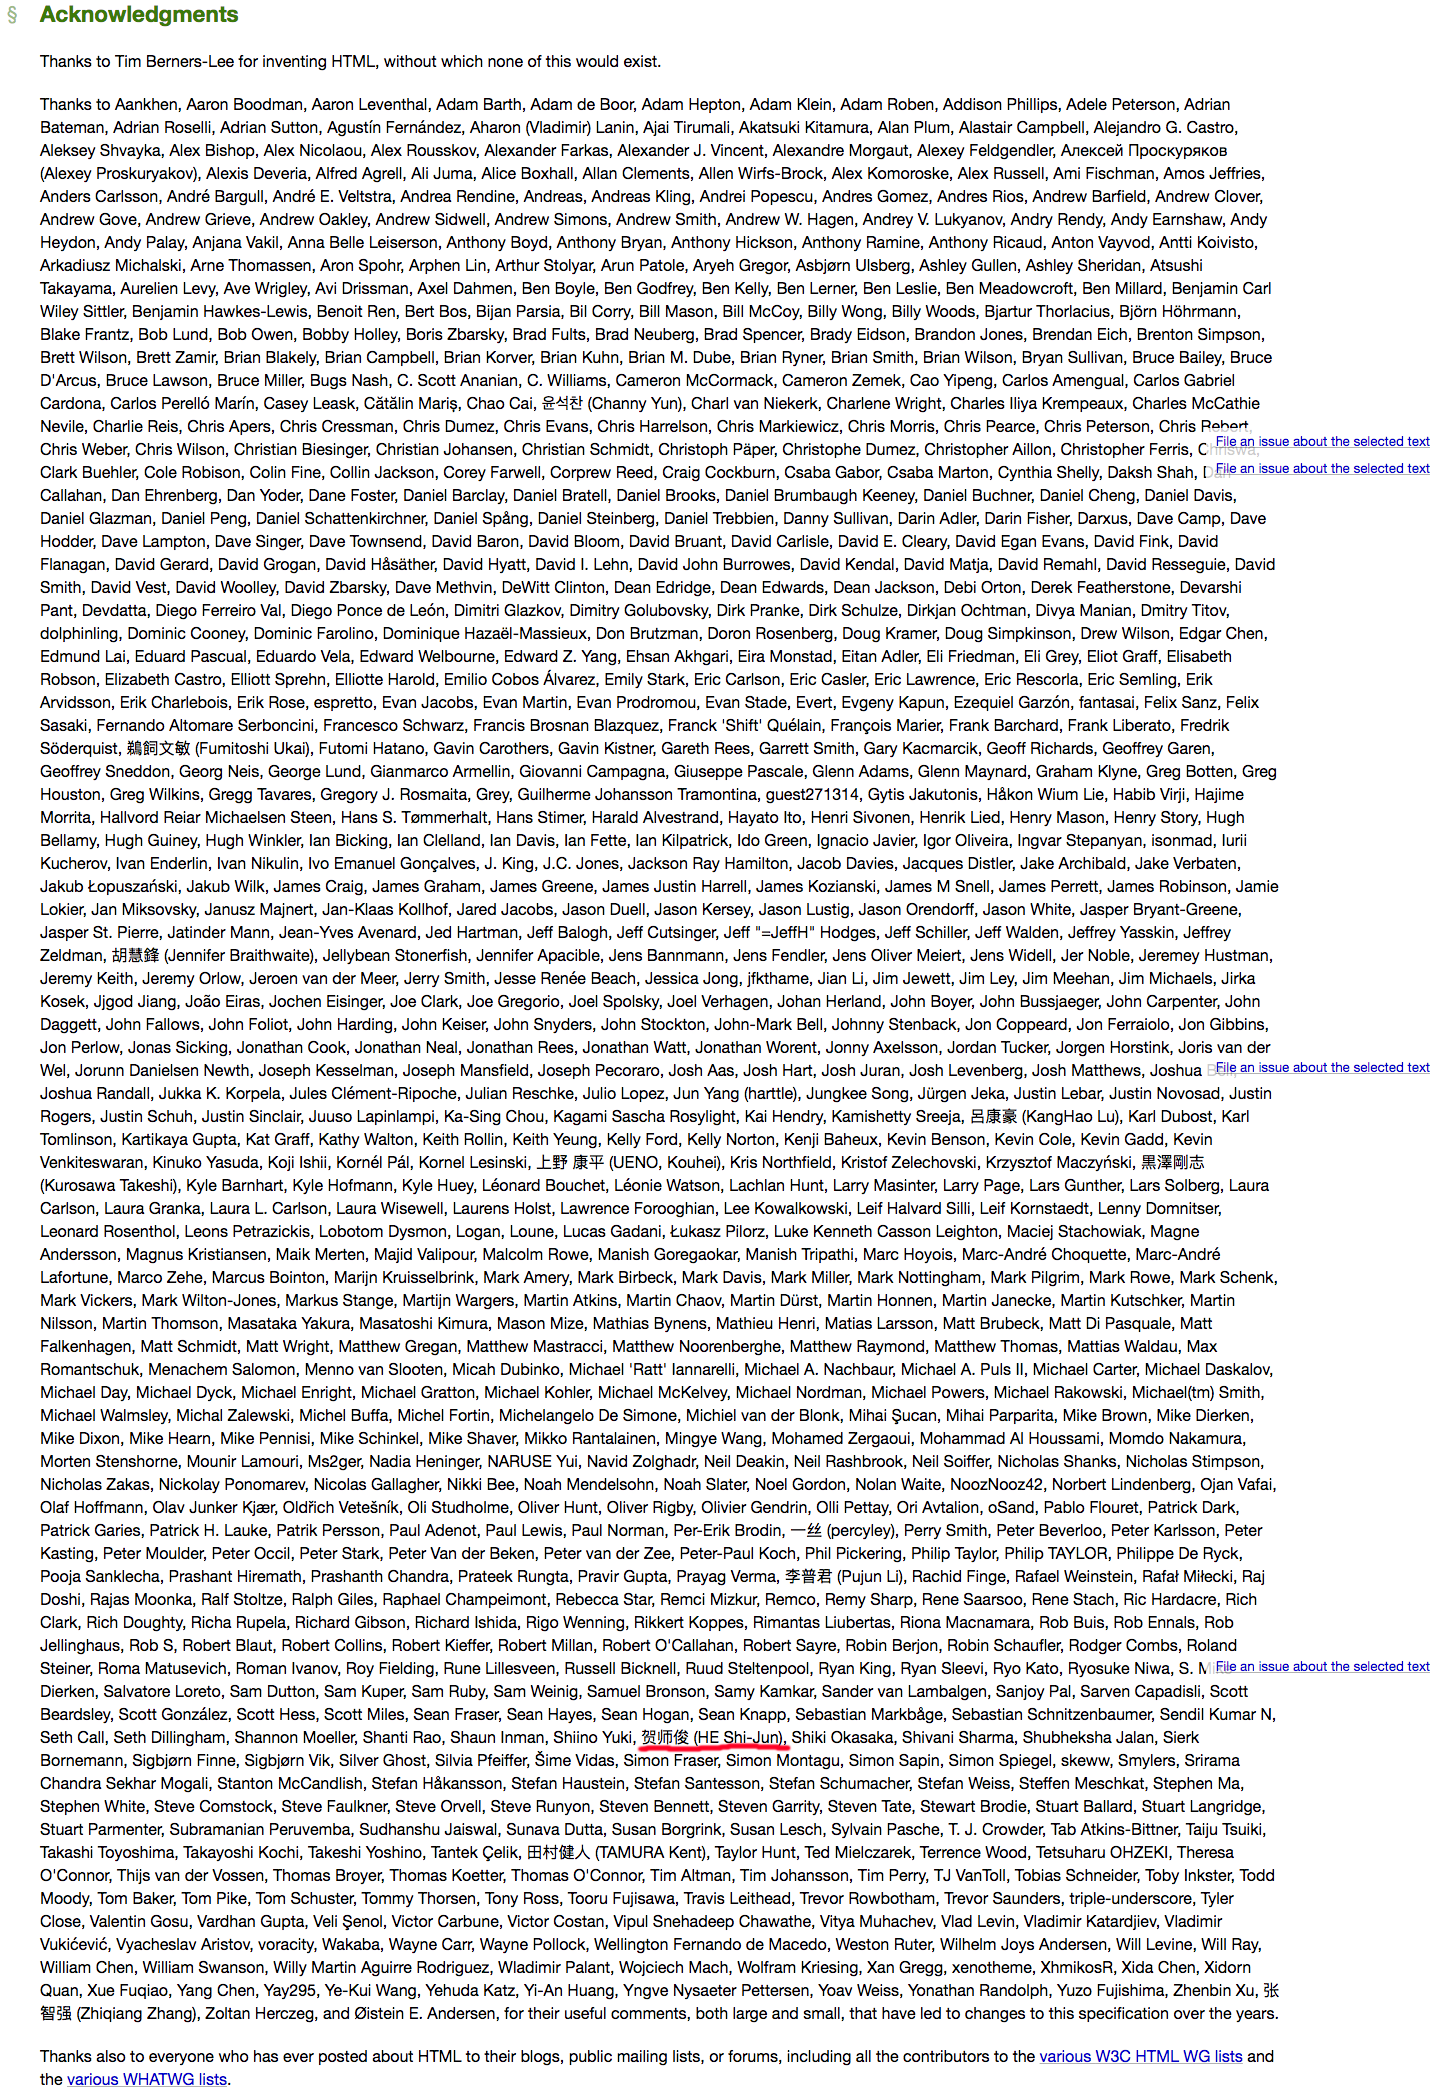 Hax in HTML Acknowledgments